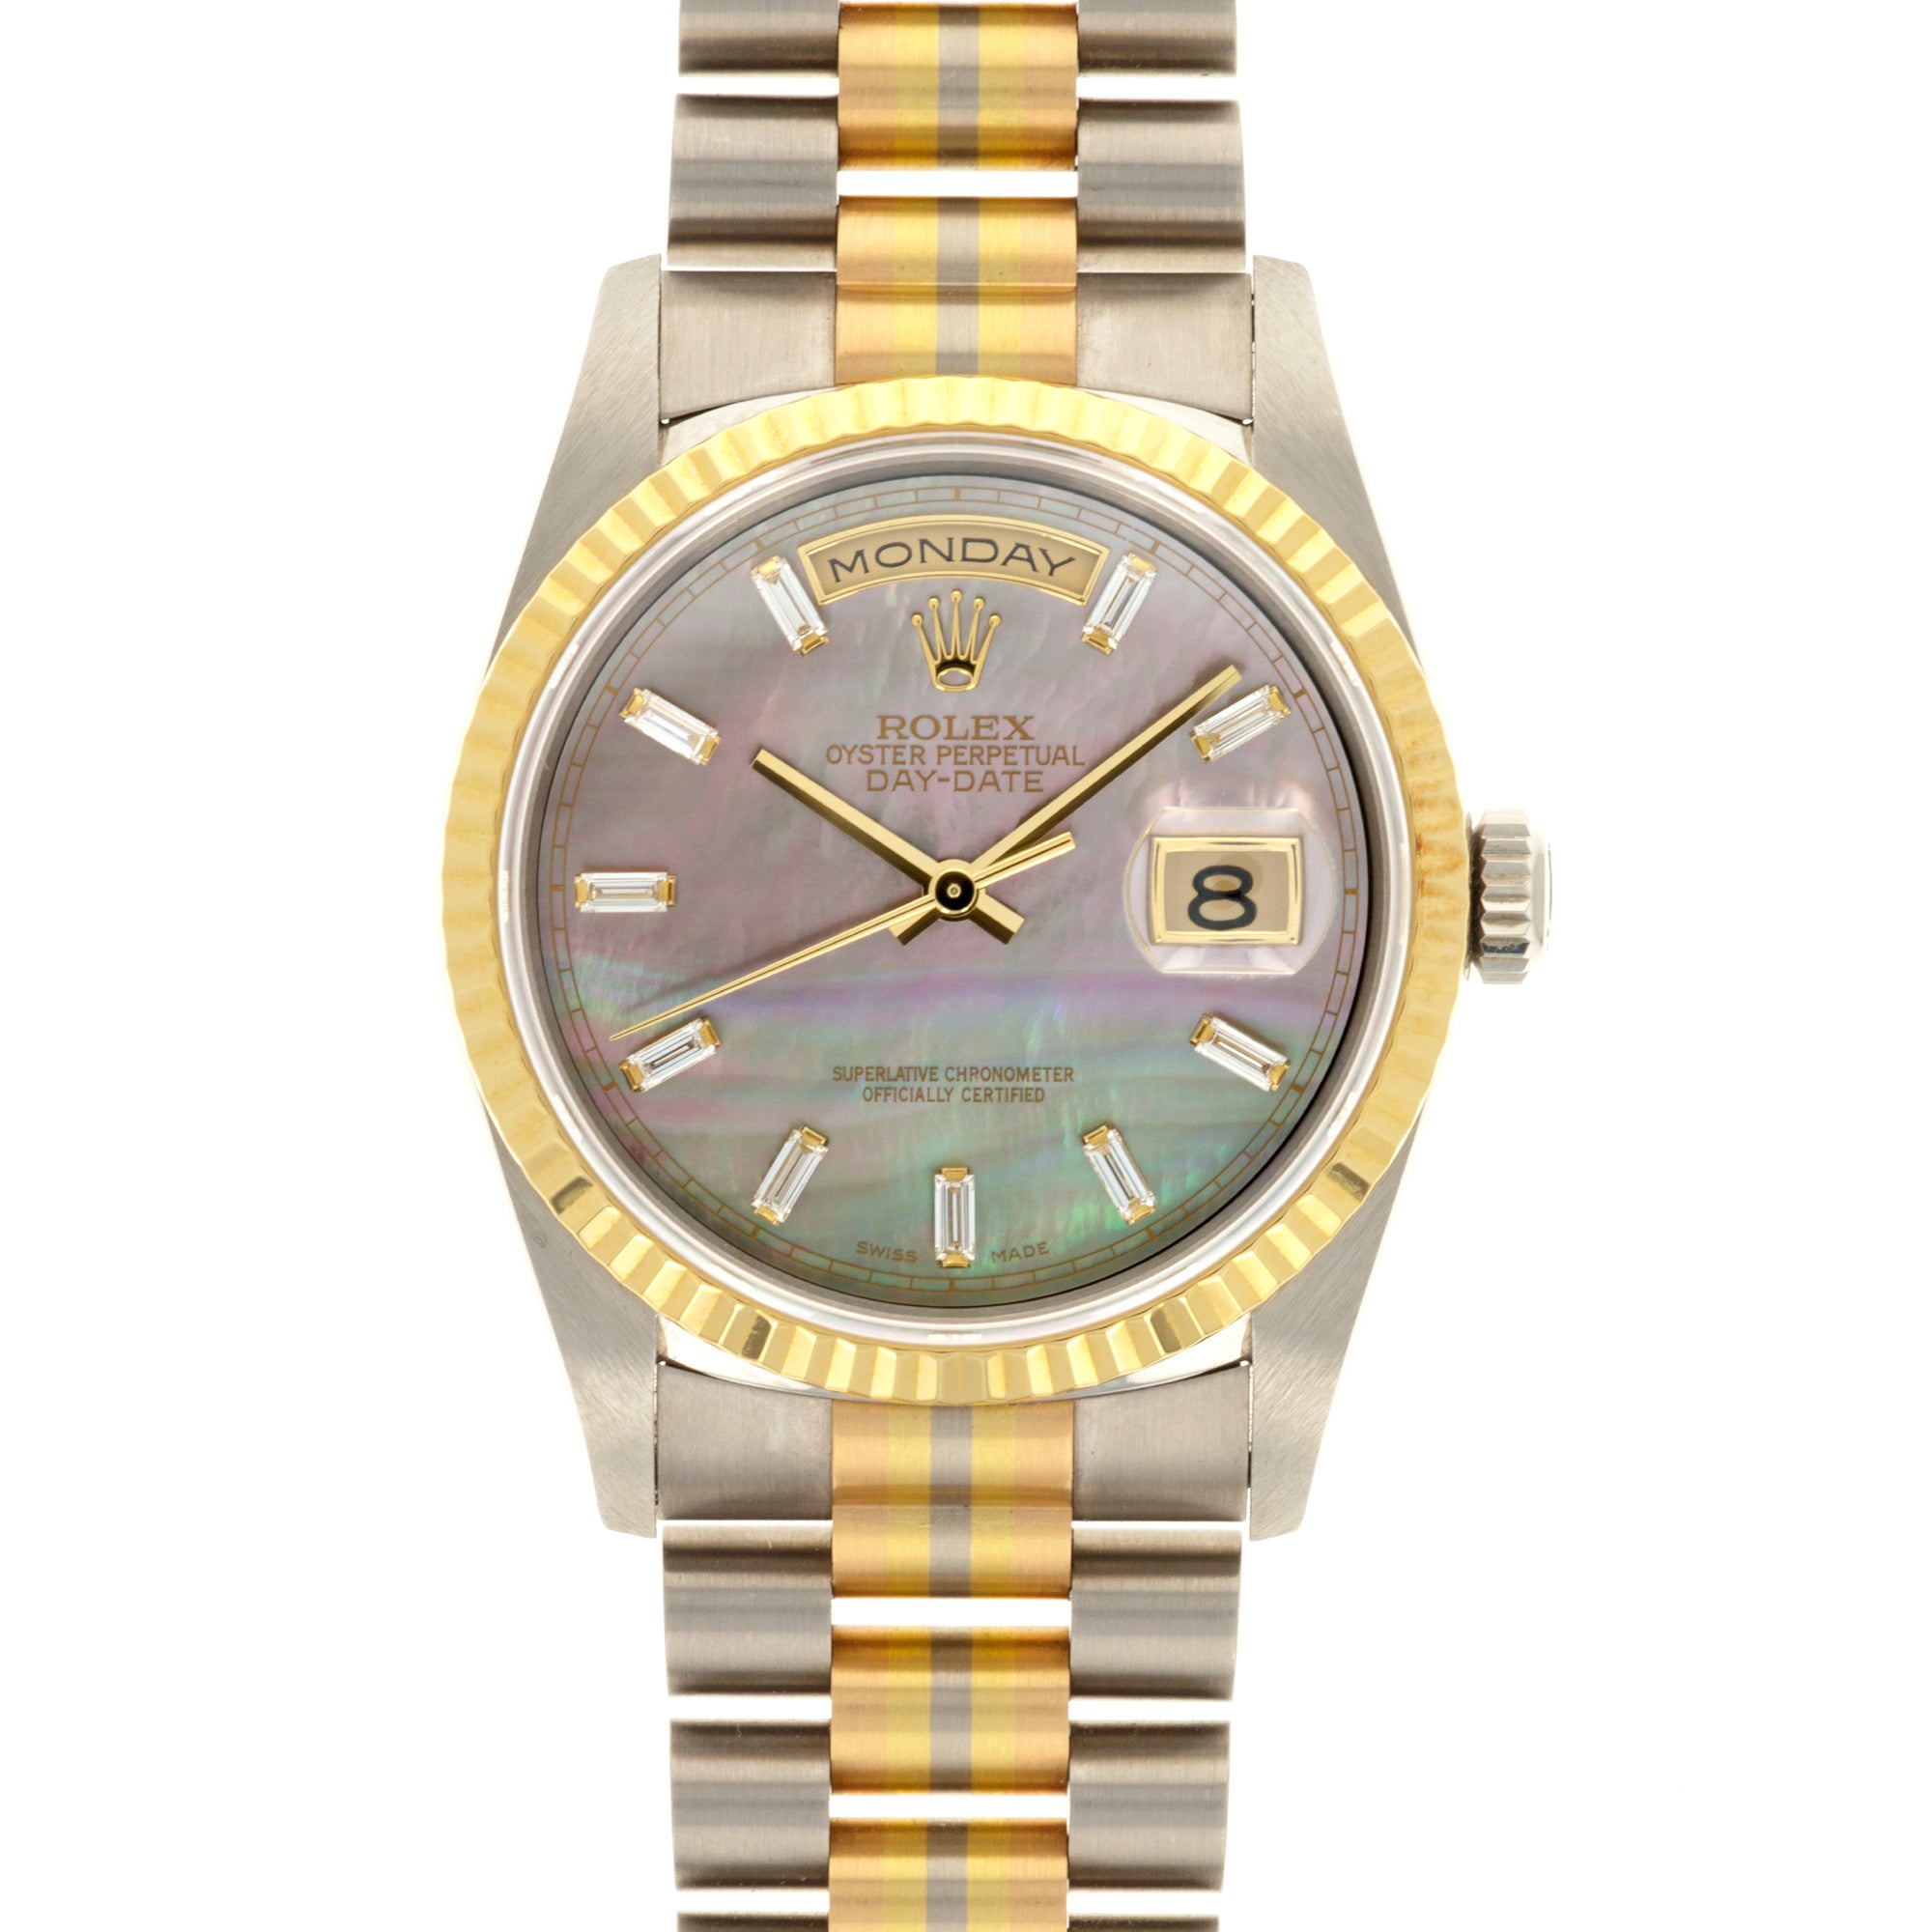 Rolex - Rolex Tridor Day-Date Ref. 18239 with Mother of Pearl and Baguette Diamond Dial - The Keystone Watches